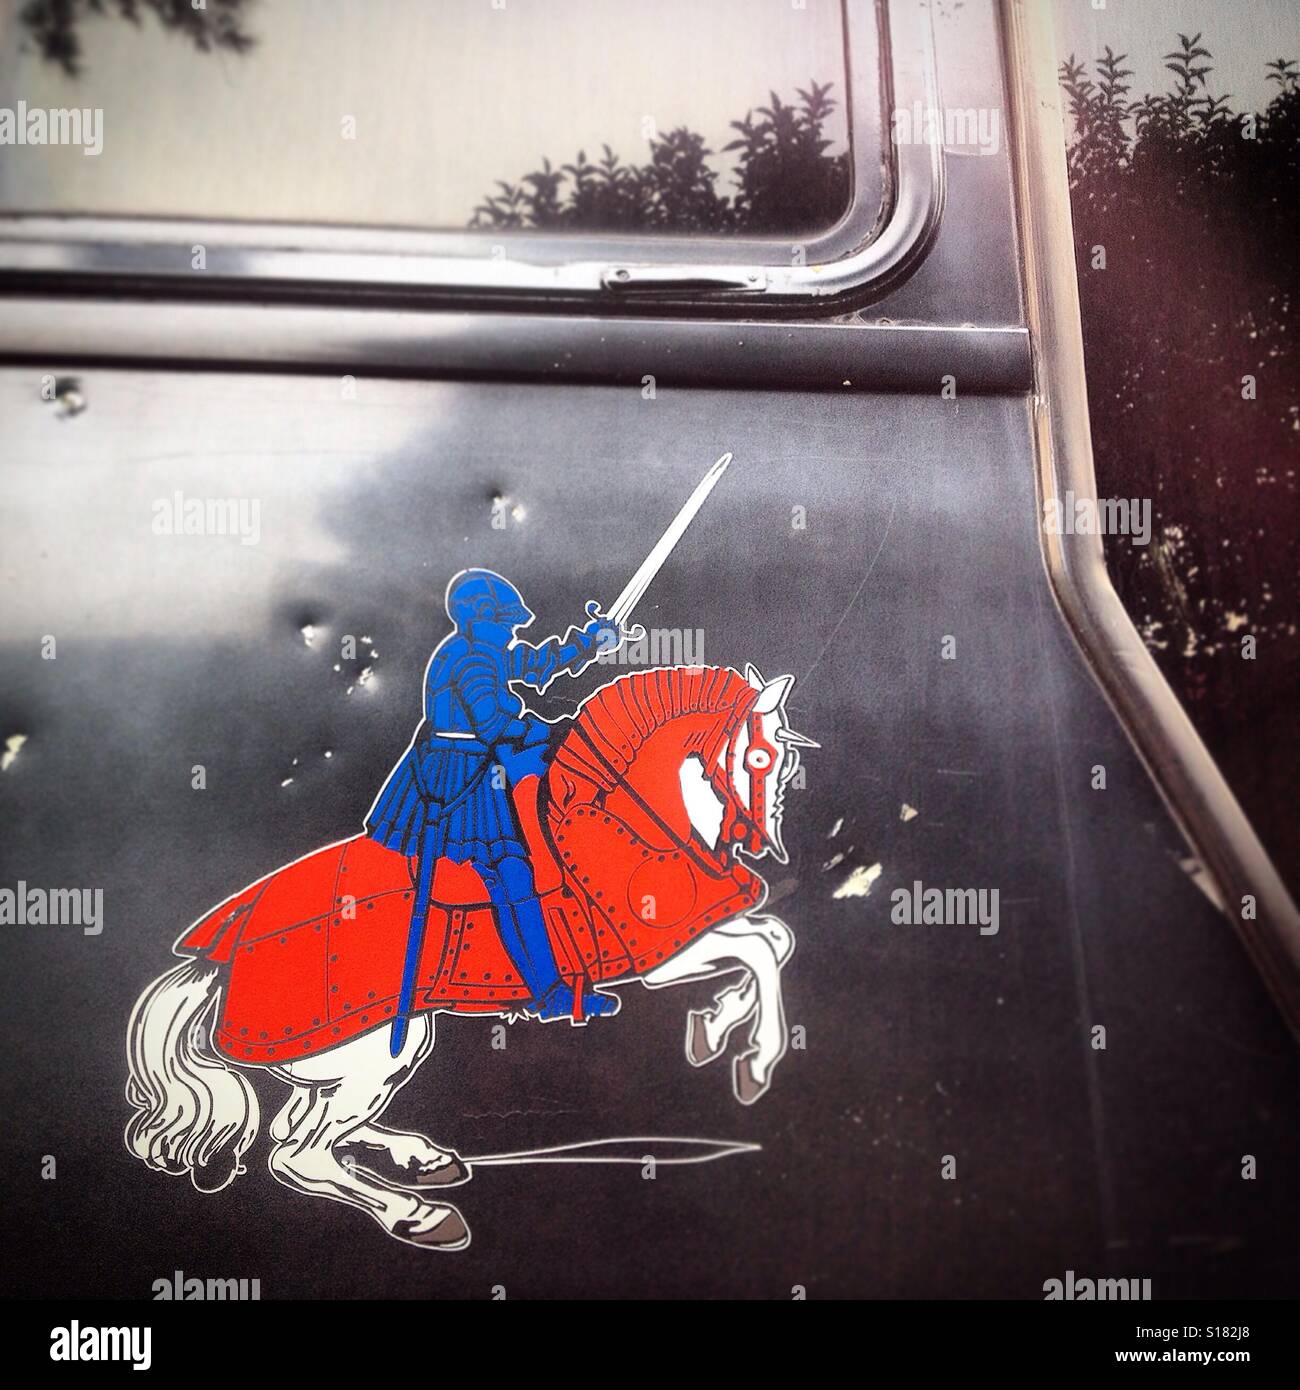 A sticker of a knight riding a white horse decorates a bus in Mexico City, Mexico Stock Photo